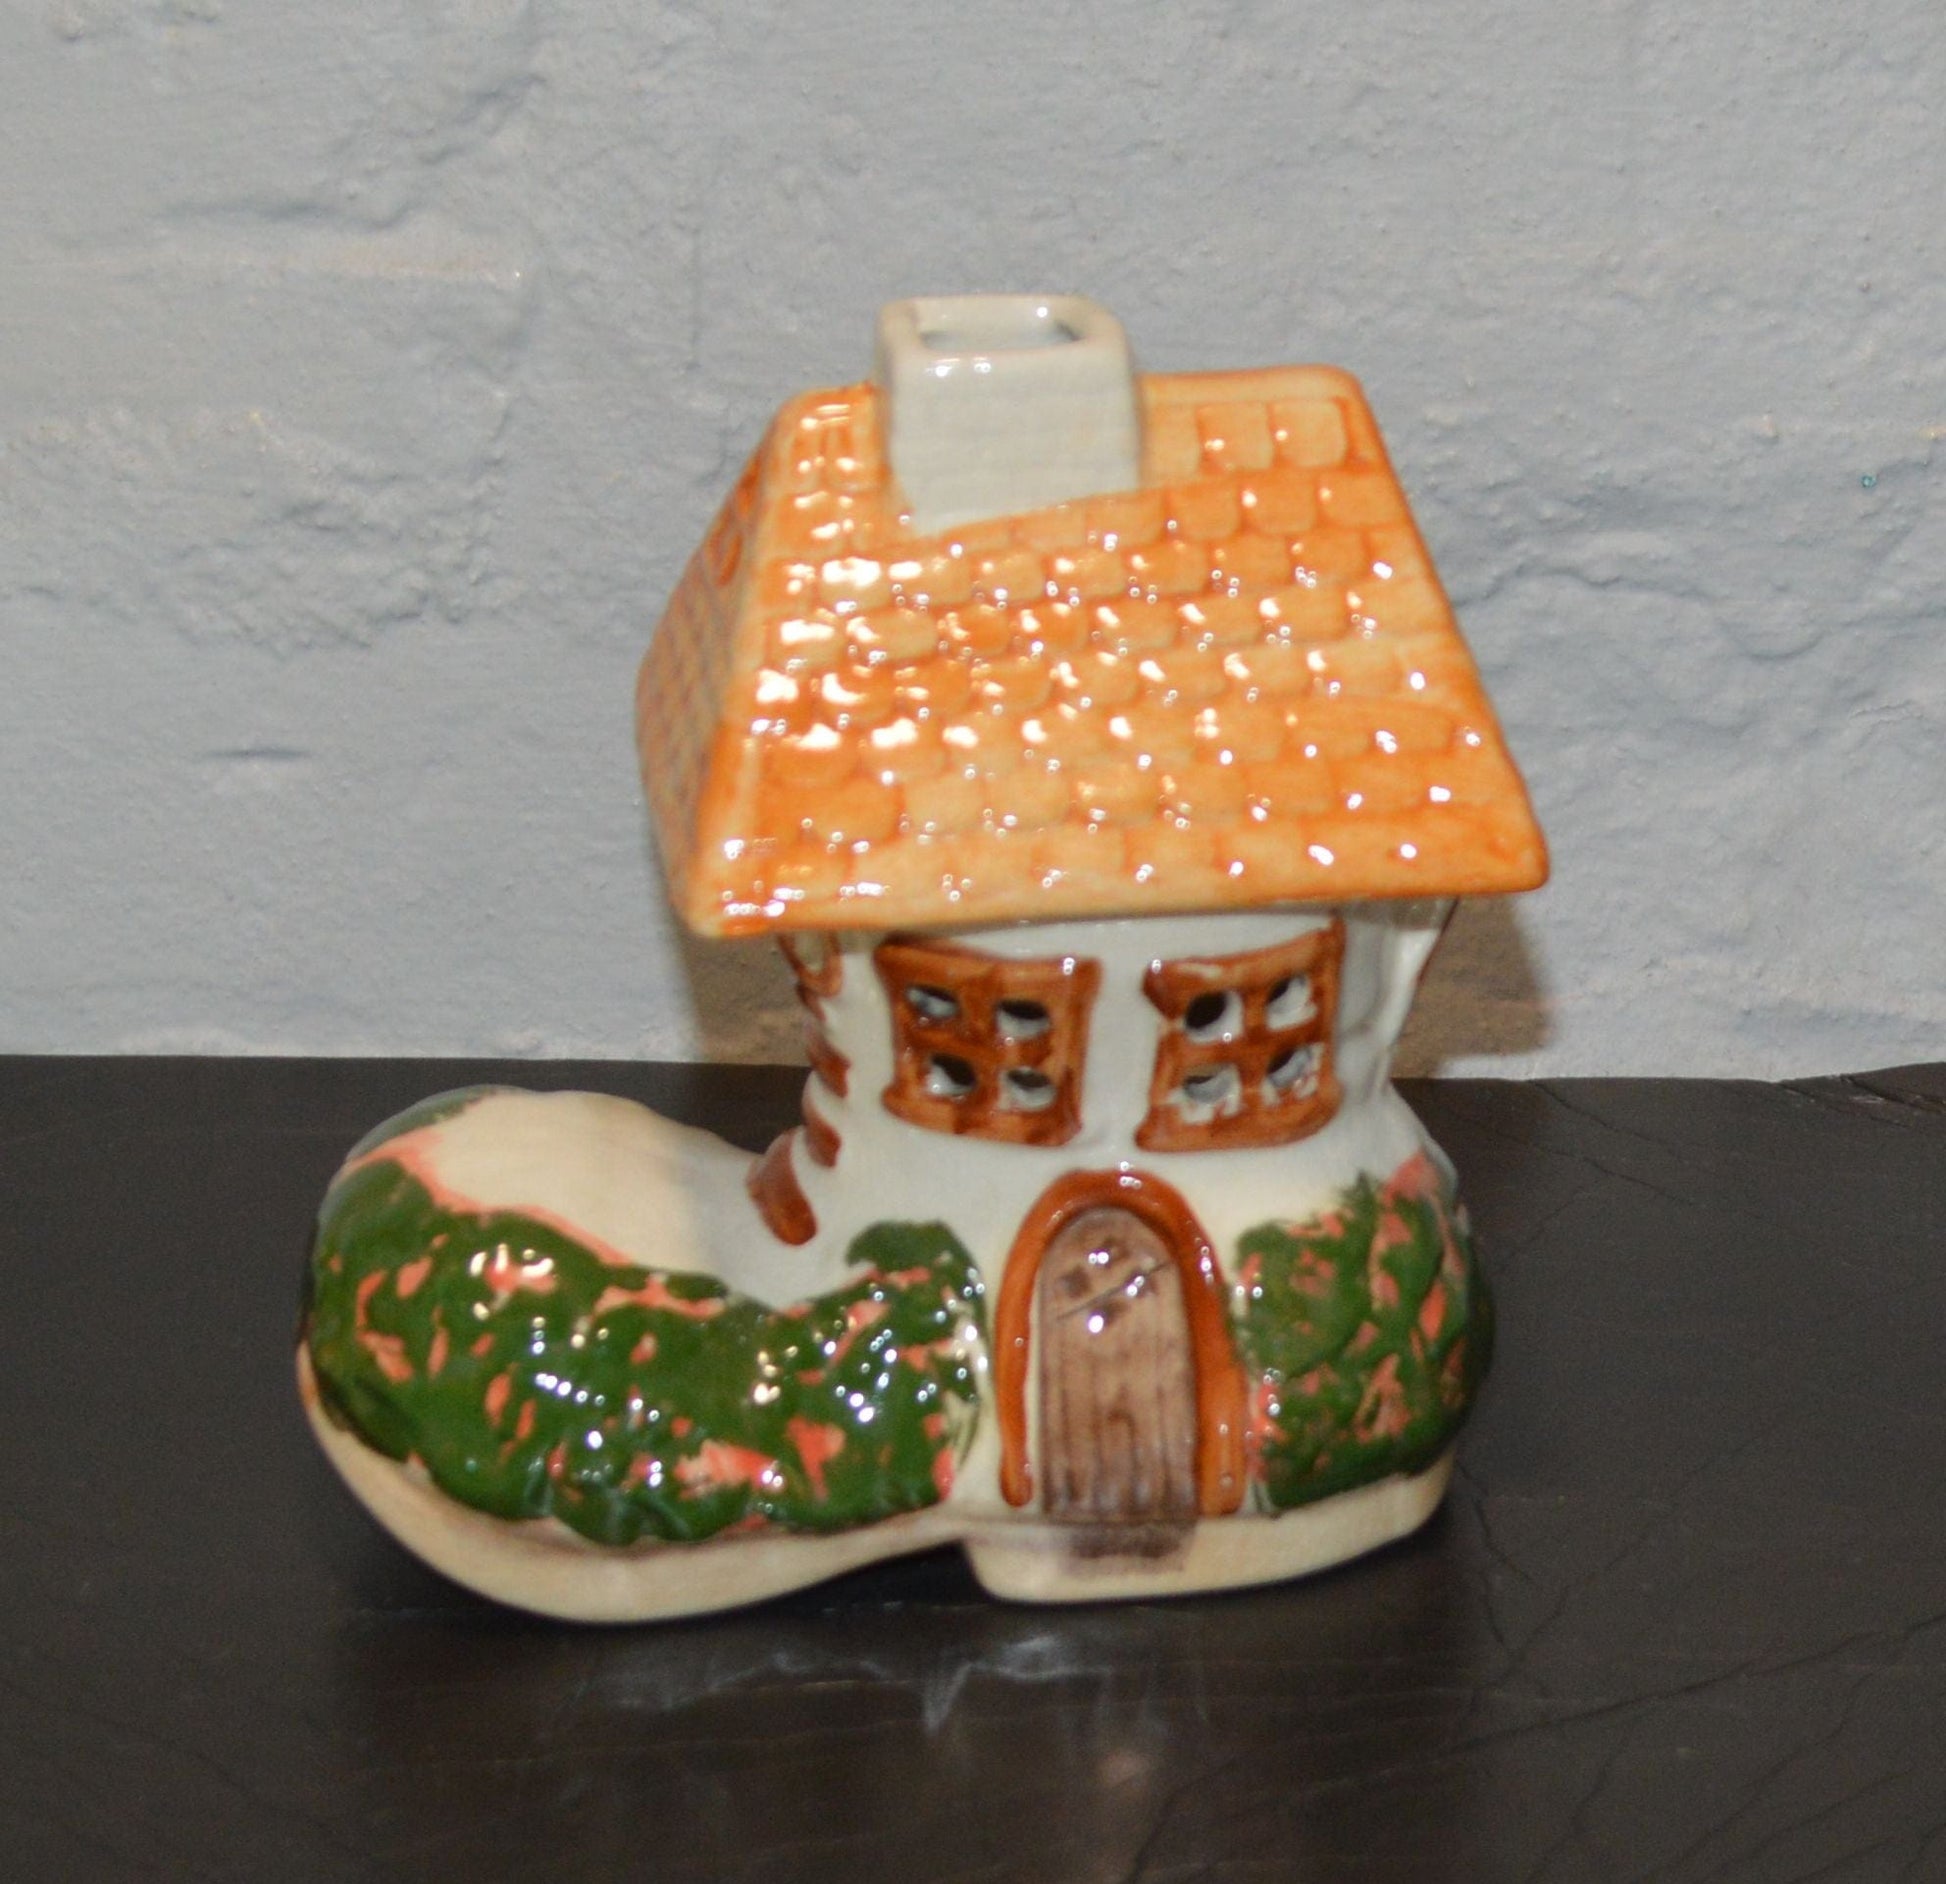 ORNAMENTAL BOOT HOUSE TEA LIGHT CANDLE HOLDER(PREVIOUSLY OWNED)GOOD CONDITION - TMD167207